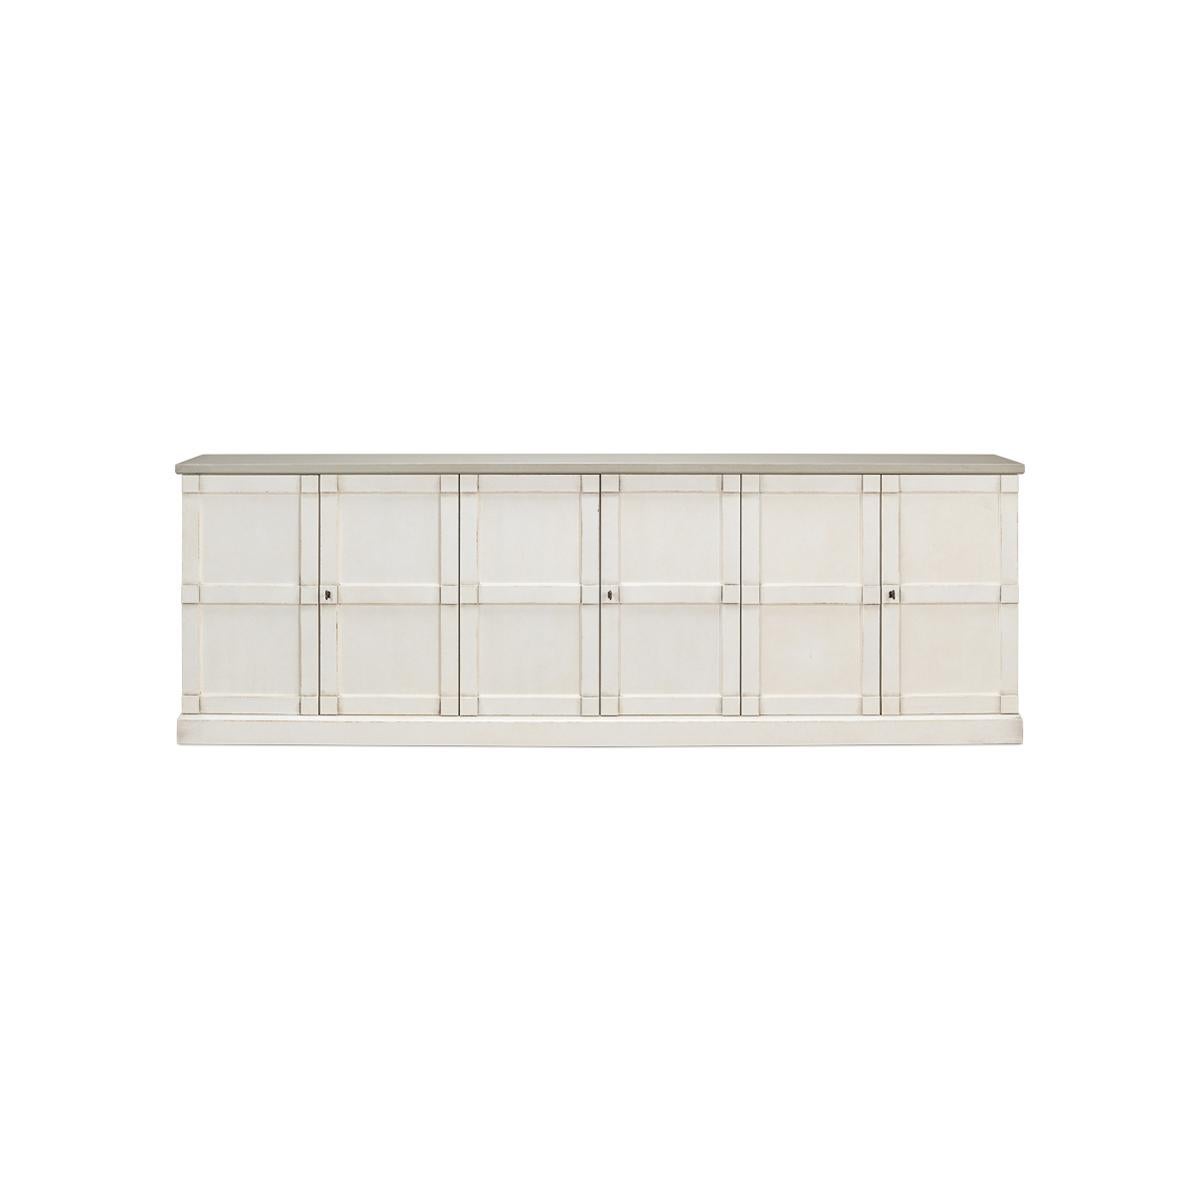 Made of pine finished in an off-white paint that is lightly distressed, with six doors, a rectangular form and a perfect depth of 15